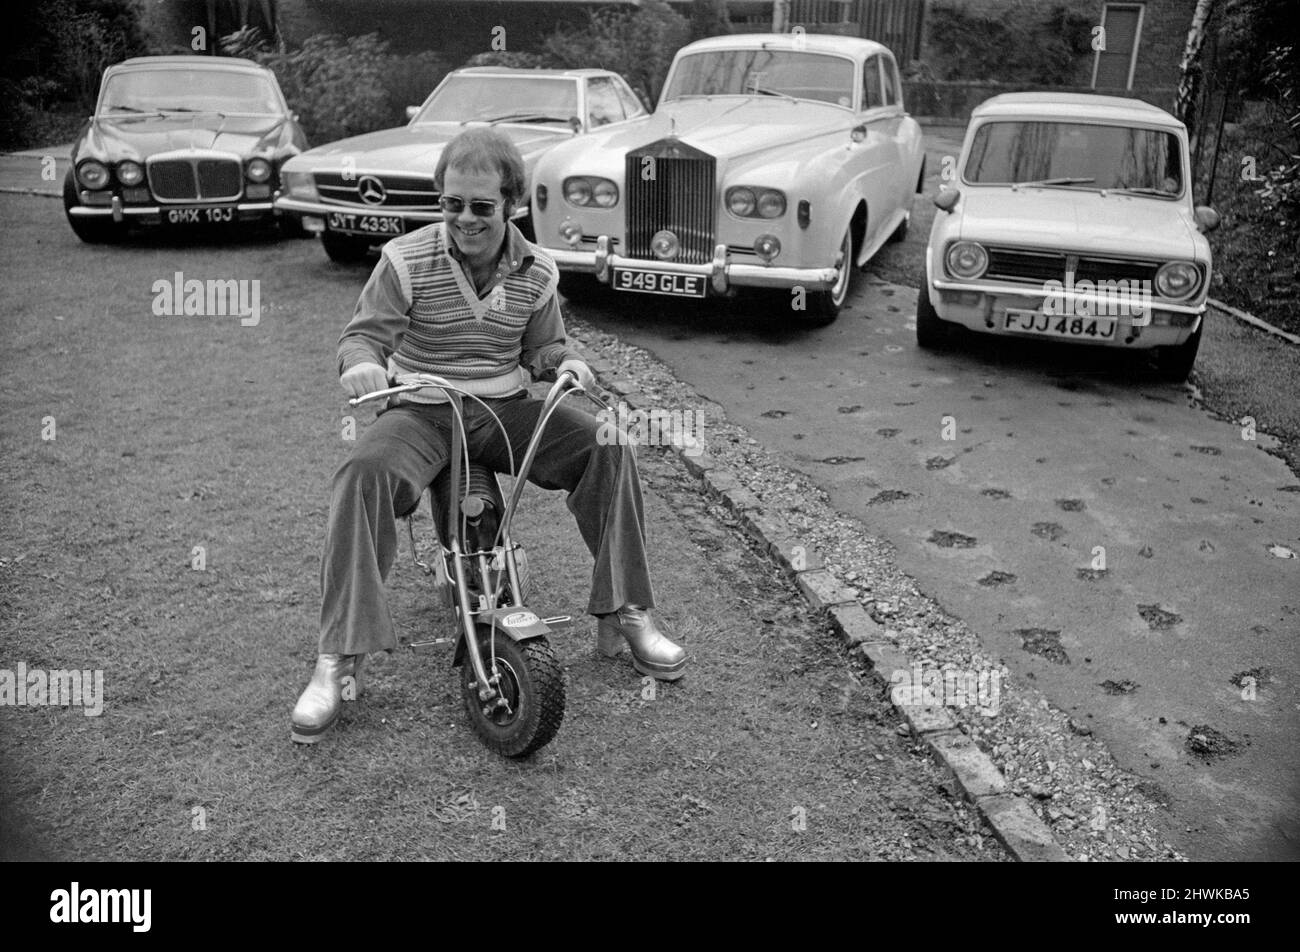 Elton John pictured at his home, sitting on a small motorbike in front of four of his cars.His cars include a Mercedes (2nd left) and a white Rolls Royce (3rd left)  Picture taken 4th April 1972 Stock Photo